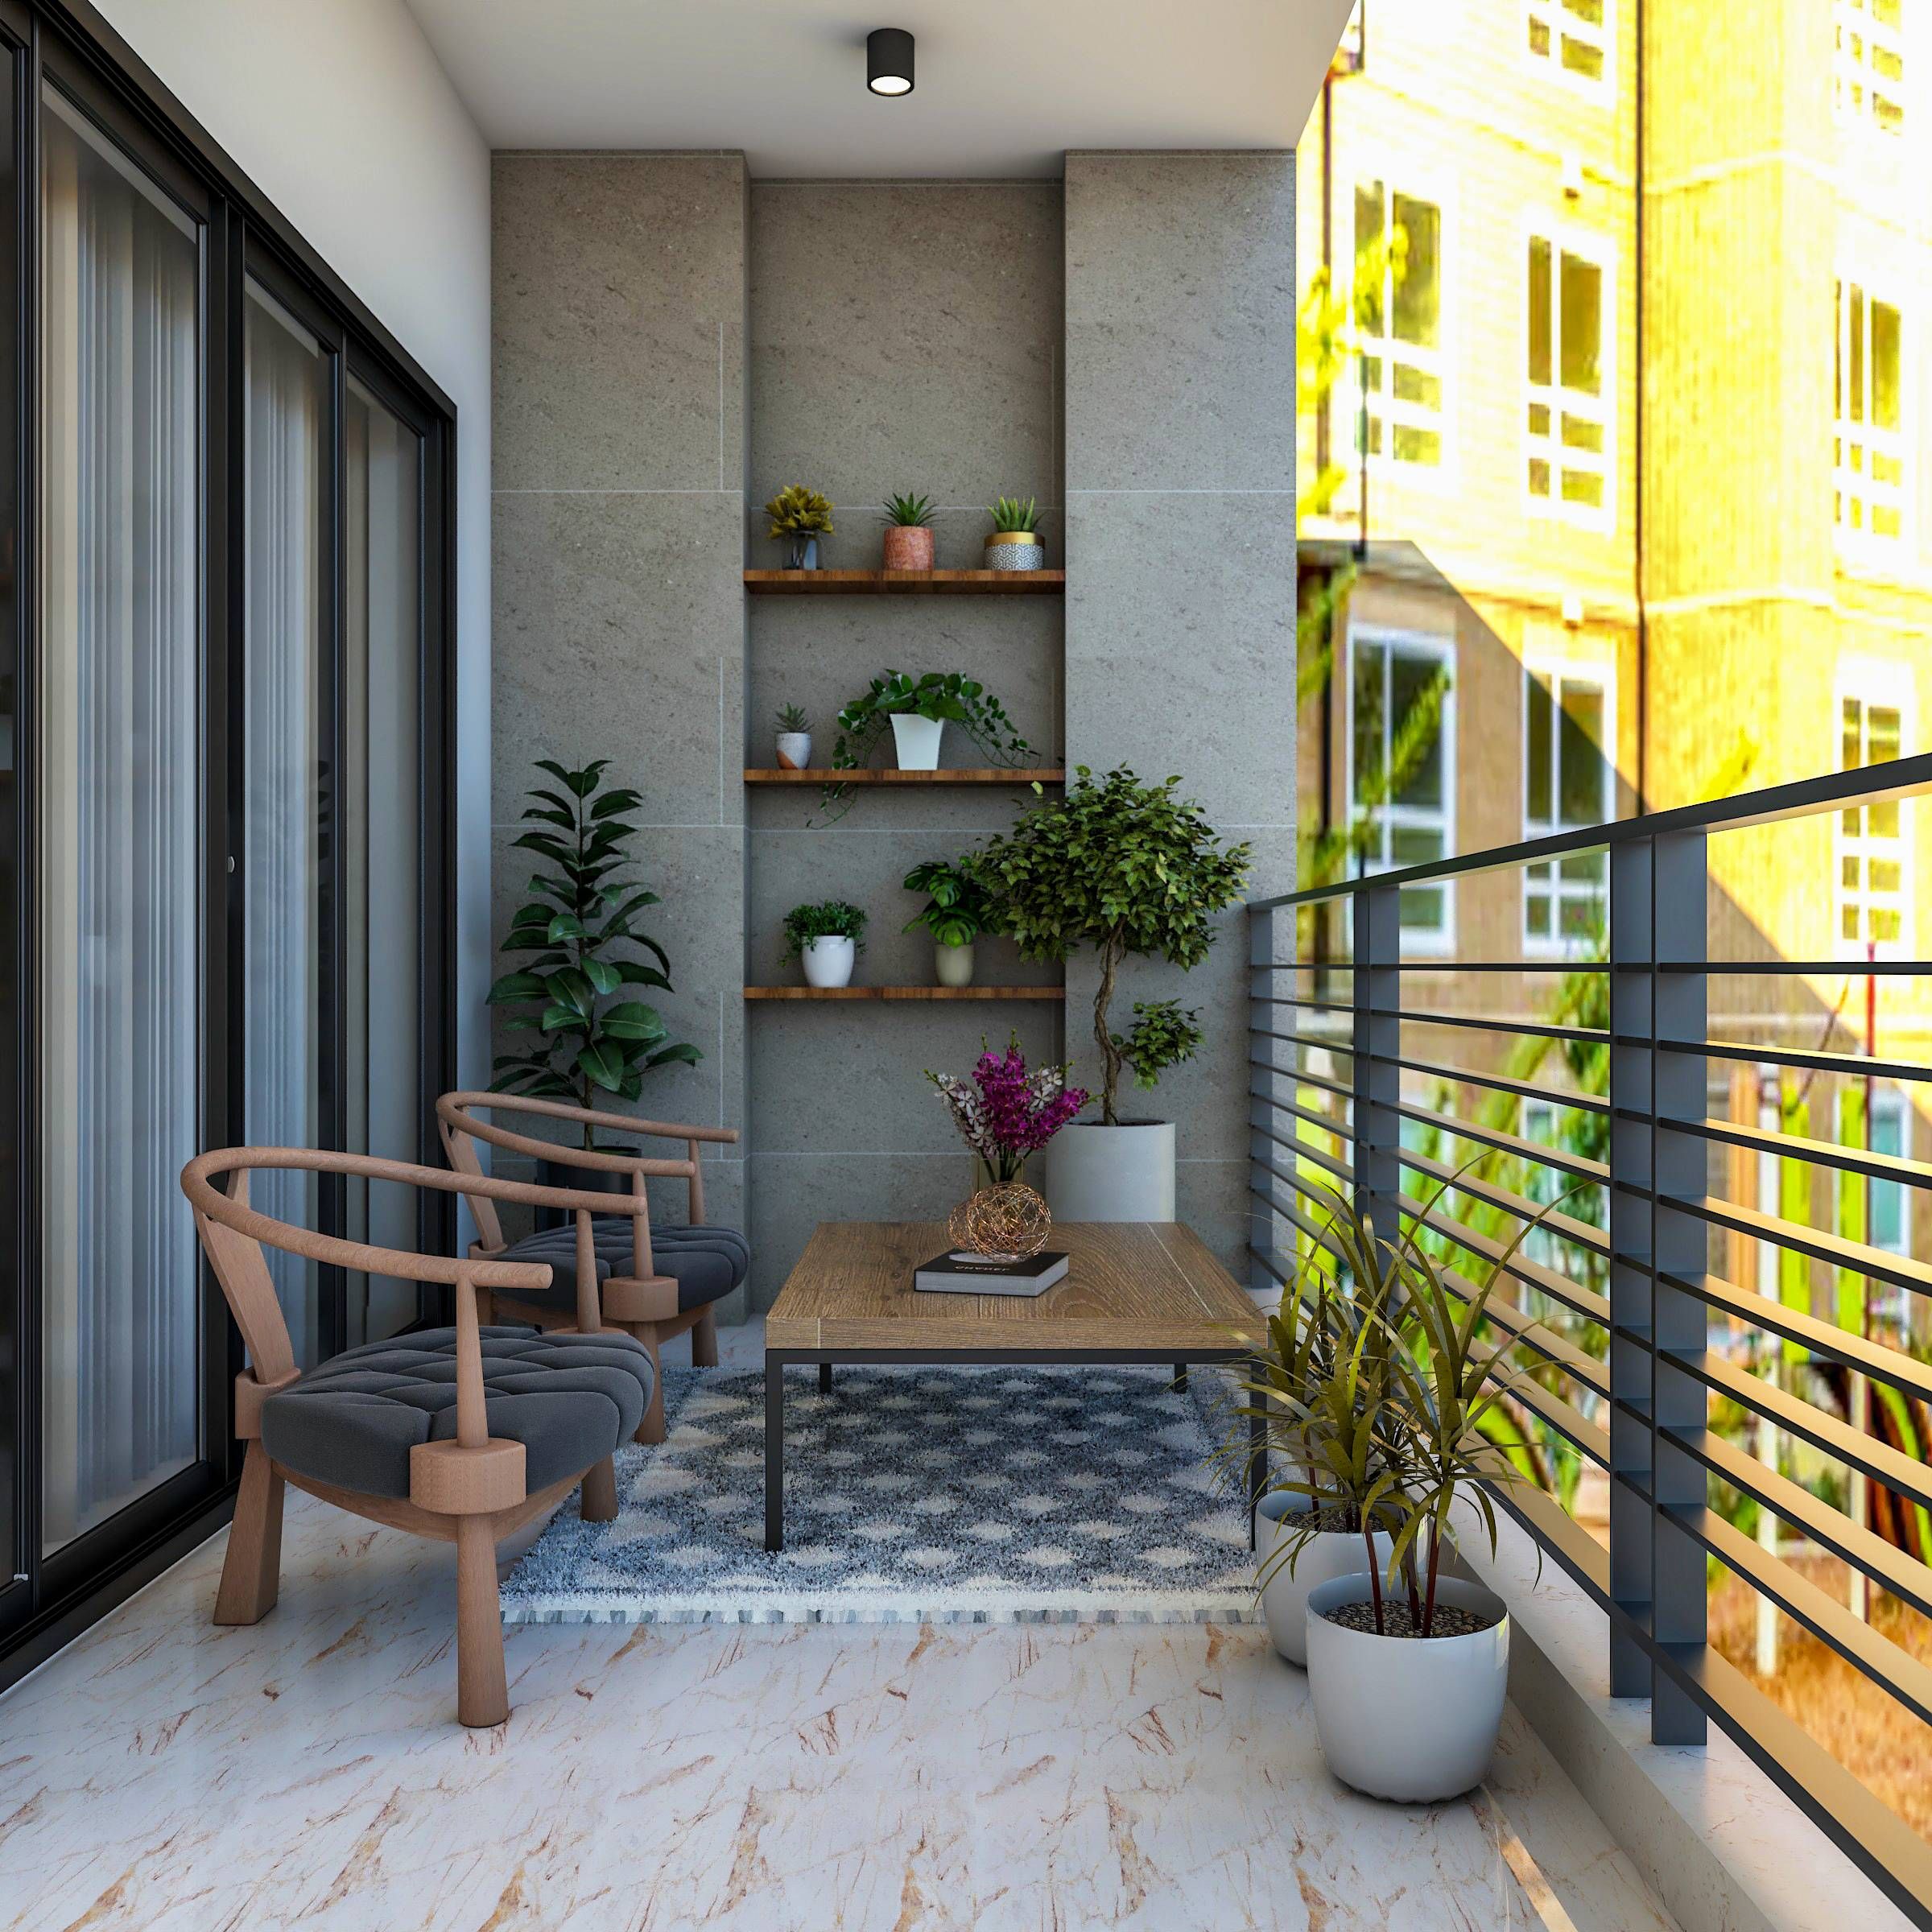 Contemporary Balcony Design With Wooden Table And Chairs